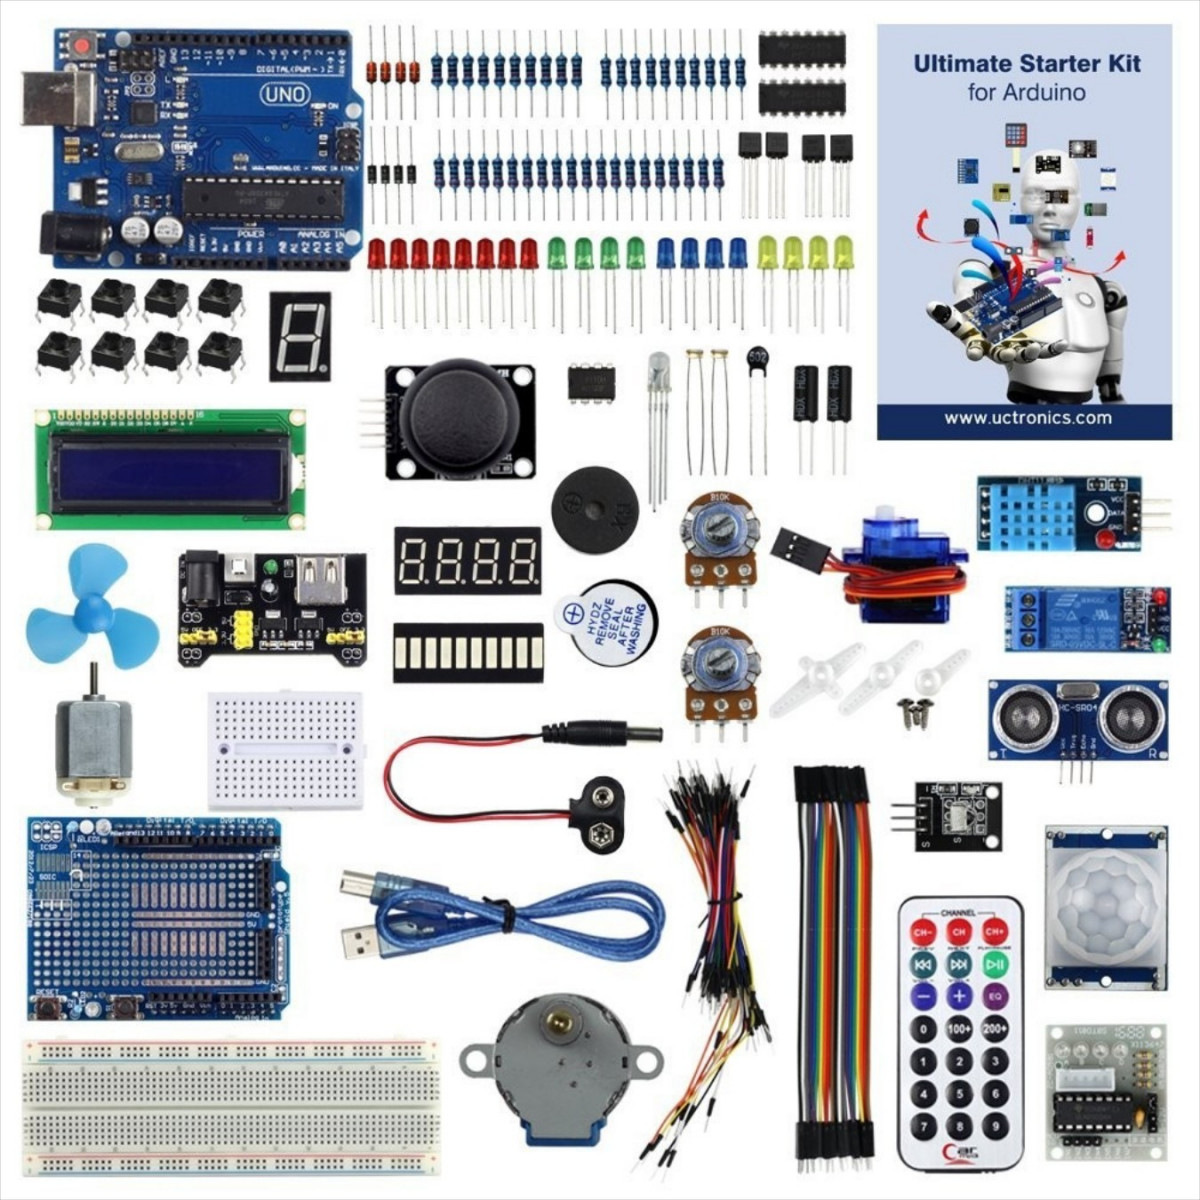 UCTRONICS Advanced Starter Learning Kit for Arduino UNO